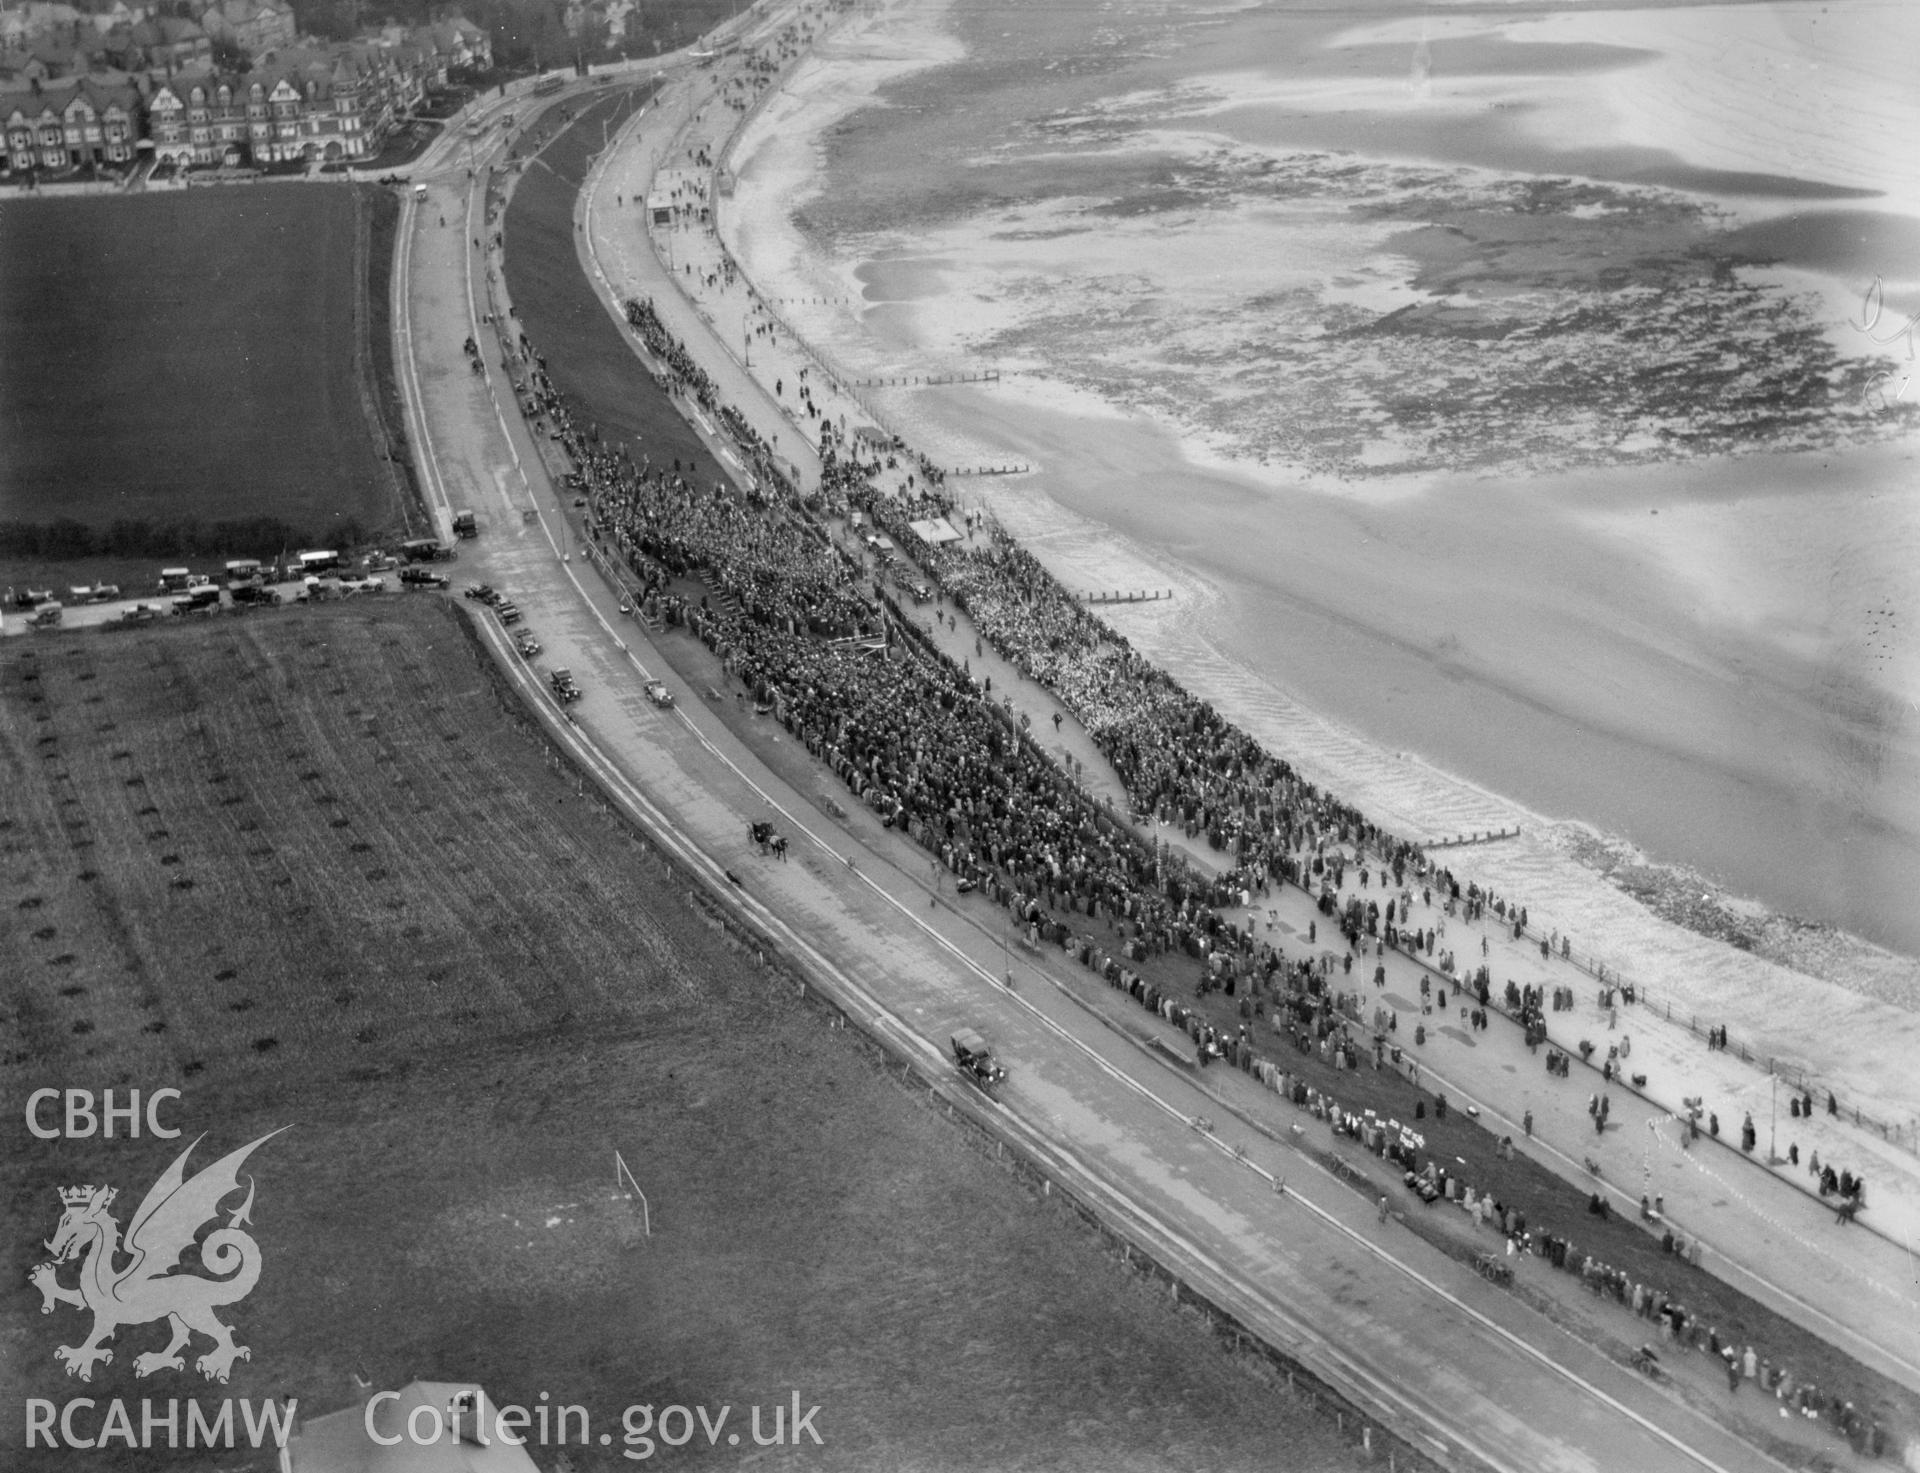 Colwyn Bay showing calvalcade of vehicles and crowds during during the visit of the Prince of Wales (later Edward VIII) in November 1923, oblique aerial view. 5?x4? black and white glass plate negative.